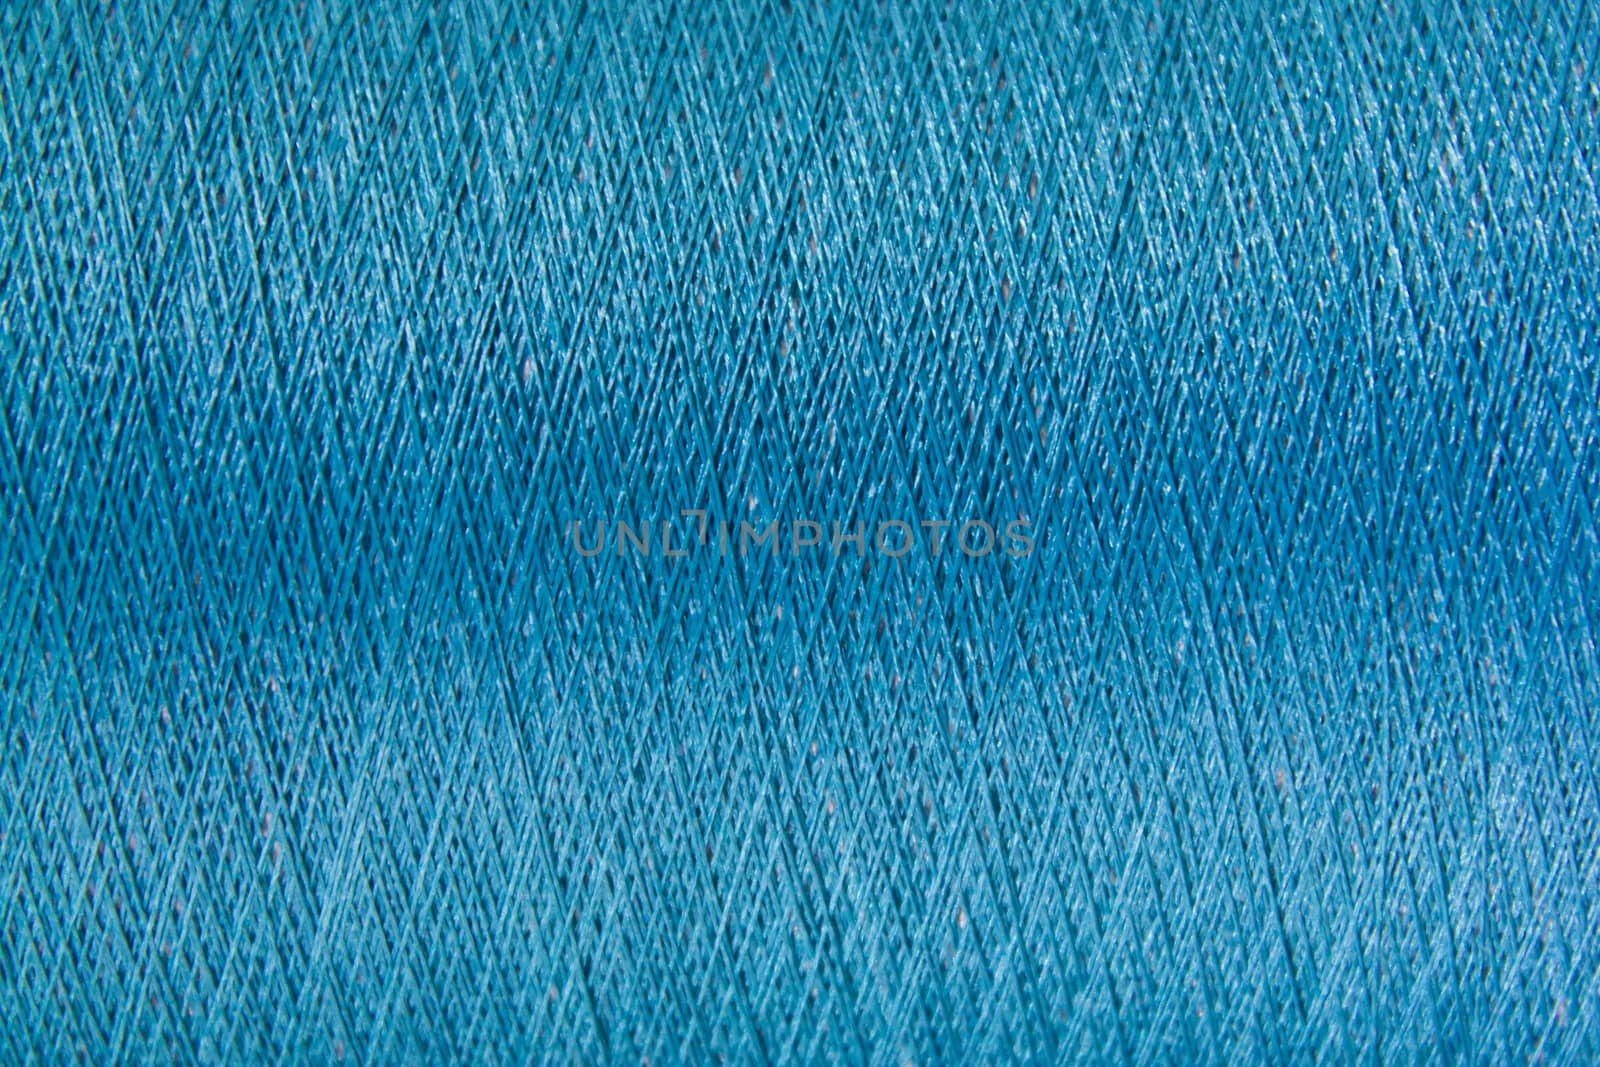 Closed up of blue color thread texture background by Hengpattanapong